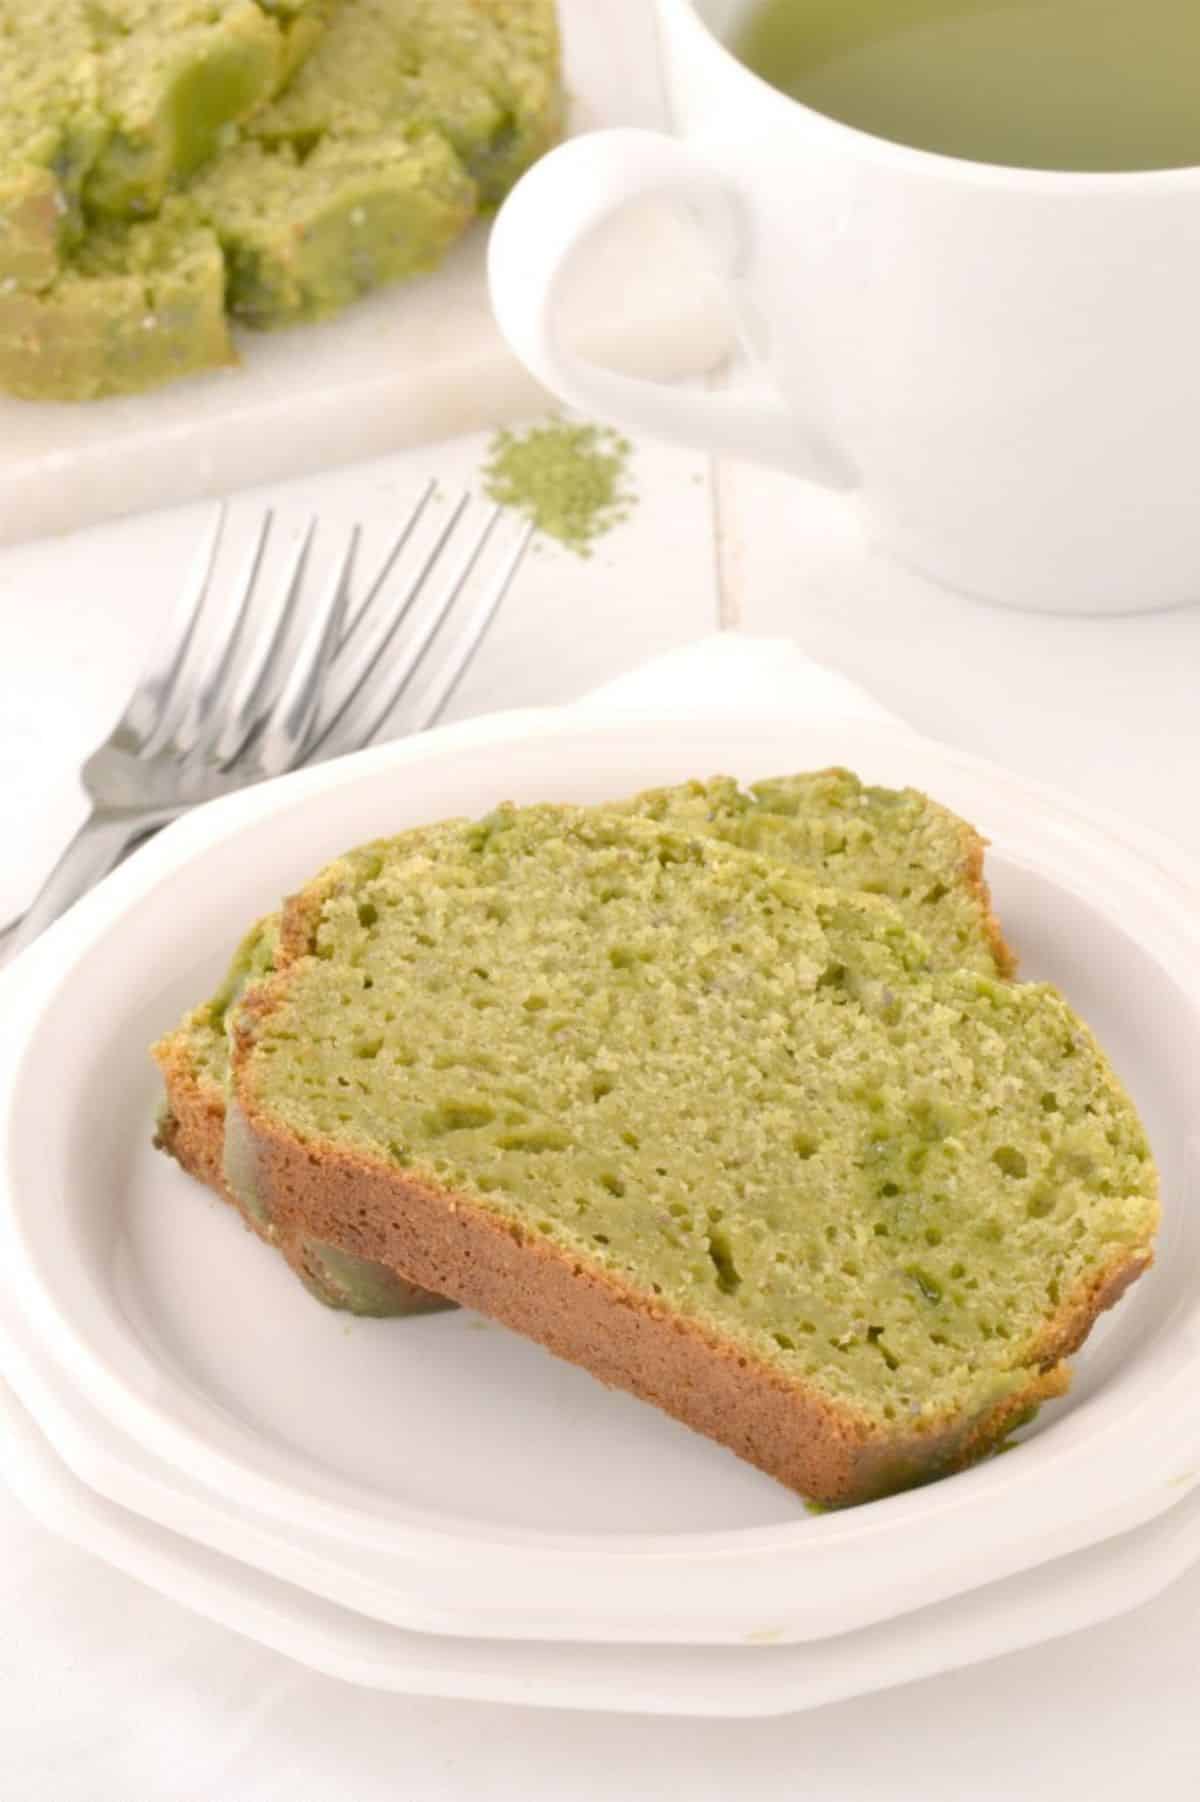 Two pieces of green tea yogurt cake on a white plate.